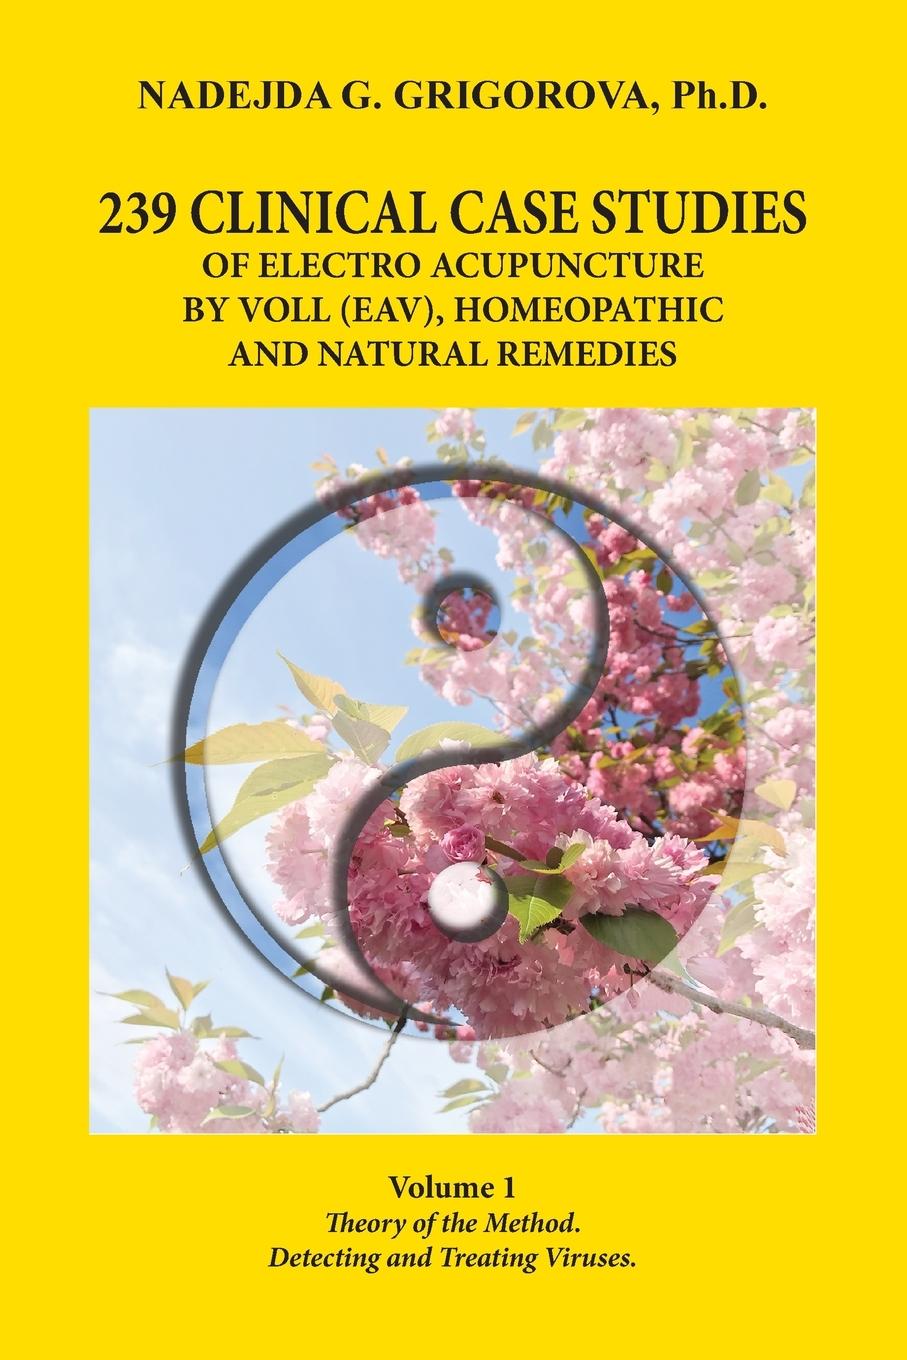 Carte 239 Clinical Case Studies of Electro Acupuncture by Voll (Eav), Homeopathic and Natural Remedies Grigorova Nadejda G. Grigorova